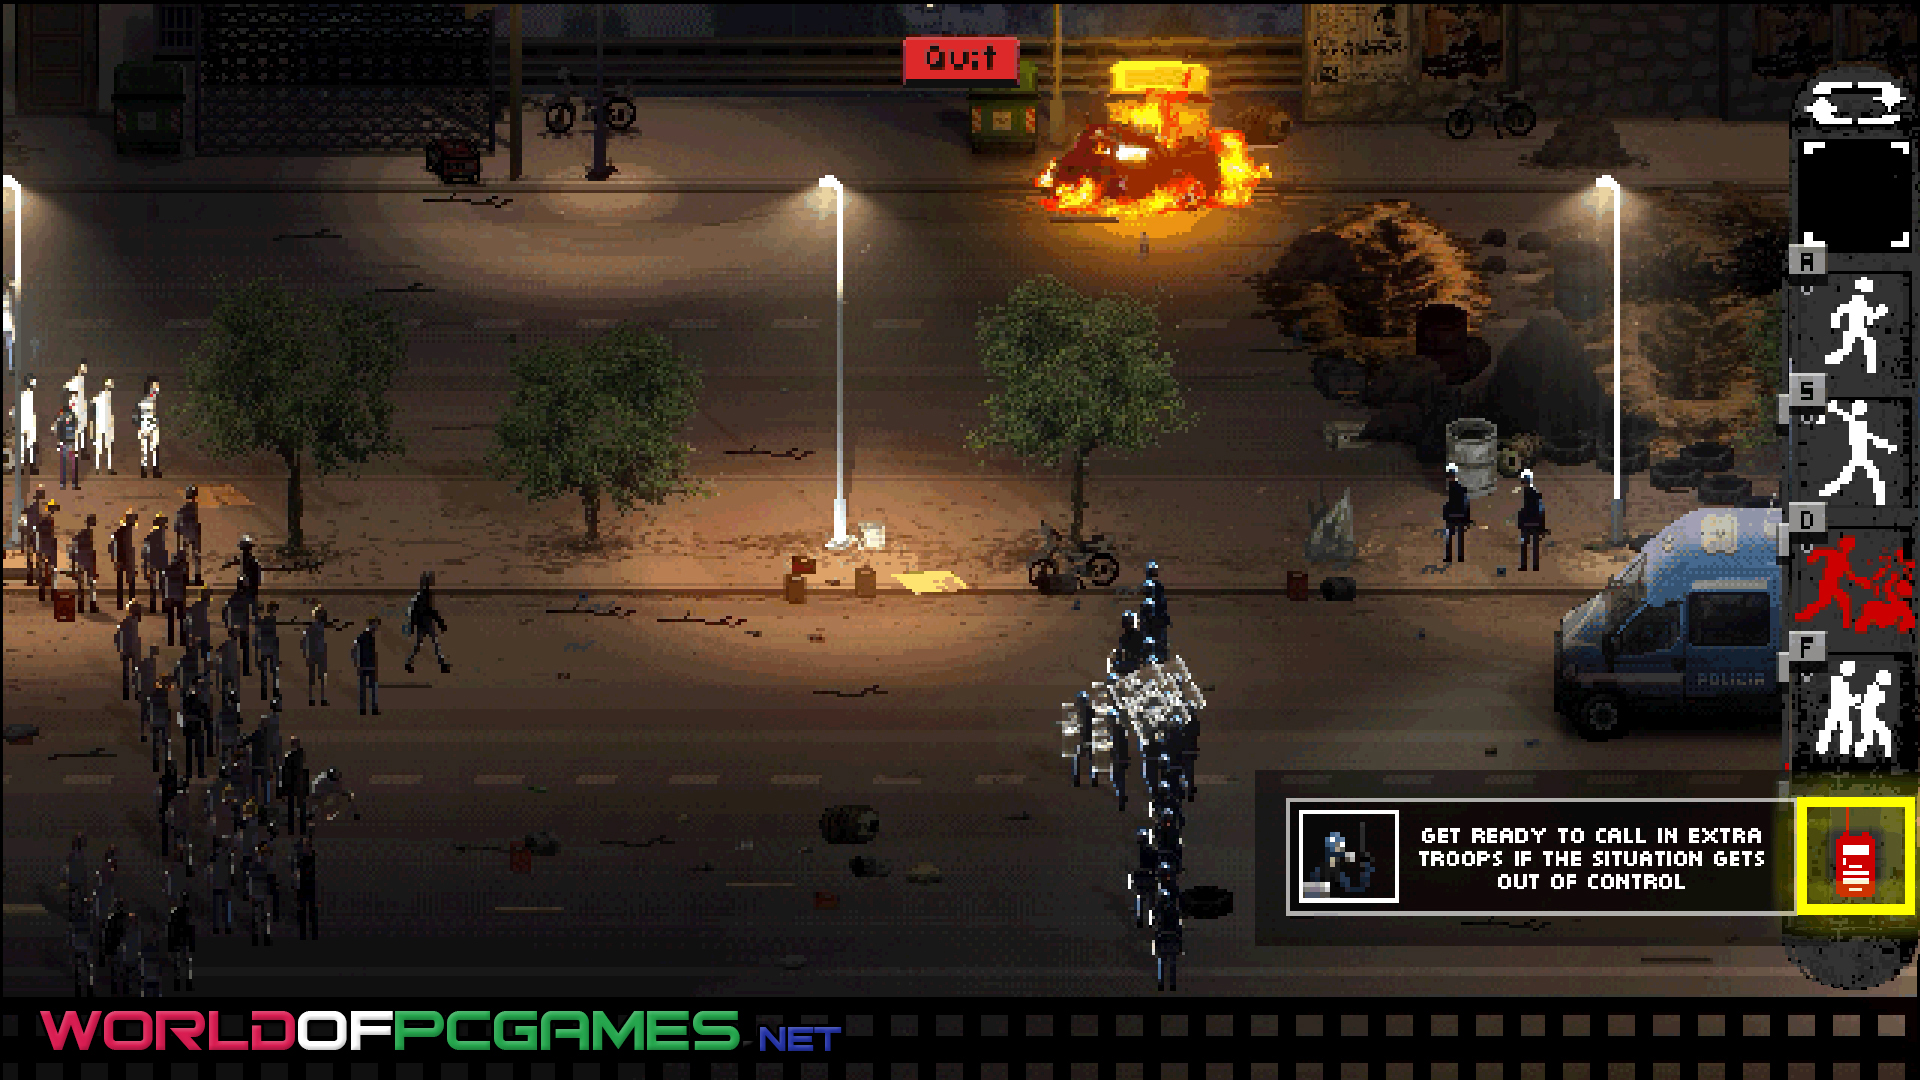 Riot Civil Unrest Free Download PC Game By worldof-pcgames.net